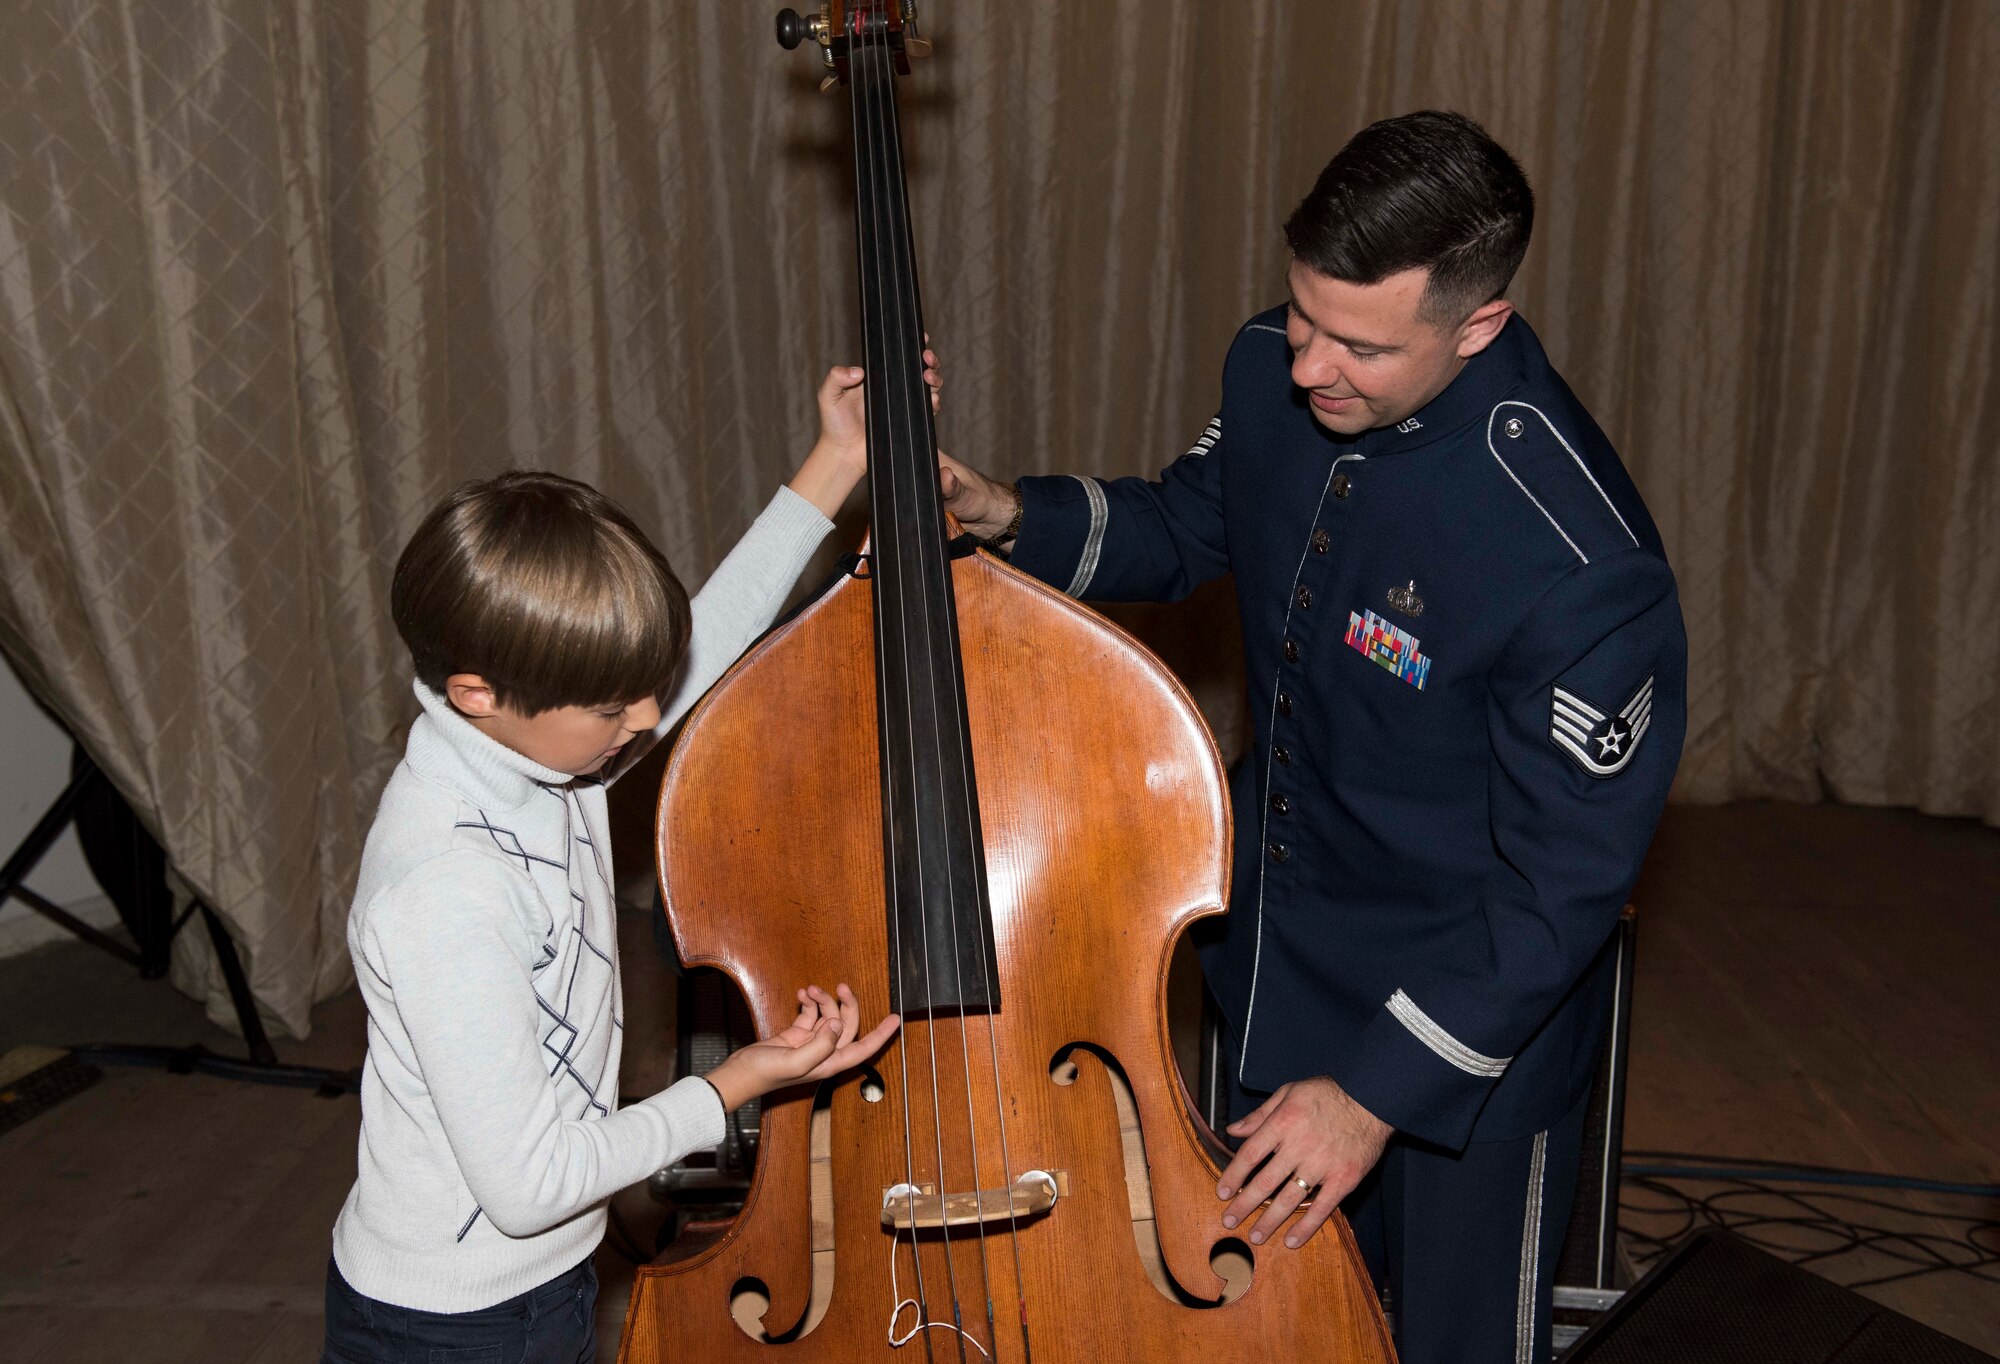 U.S. Air Force Staff Sgt. Benjamin Thomas, U.S. Air Forces in Europe Ambassadors Jazz Band bass player, talks with a local music student about needing to grow a little before being able to play the bass, during a master class with the USAFE Band and the Ukrainian National Presidential Orchestra at the Philharmonic in Chernivisti, Ukraine, Oct. 12, 2019. The USAFE Band traveled to six cities in central and western Ukraine October 6-20, 2019 to conduct the “Music of Freedom” tour, which celebrated the shared spirit of freedom and enduring partnership between U.S. and Ukrainian armed forces. (U.S. Air Force photo by Airman 1st Class Jennifer Zima)